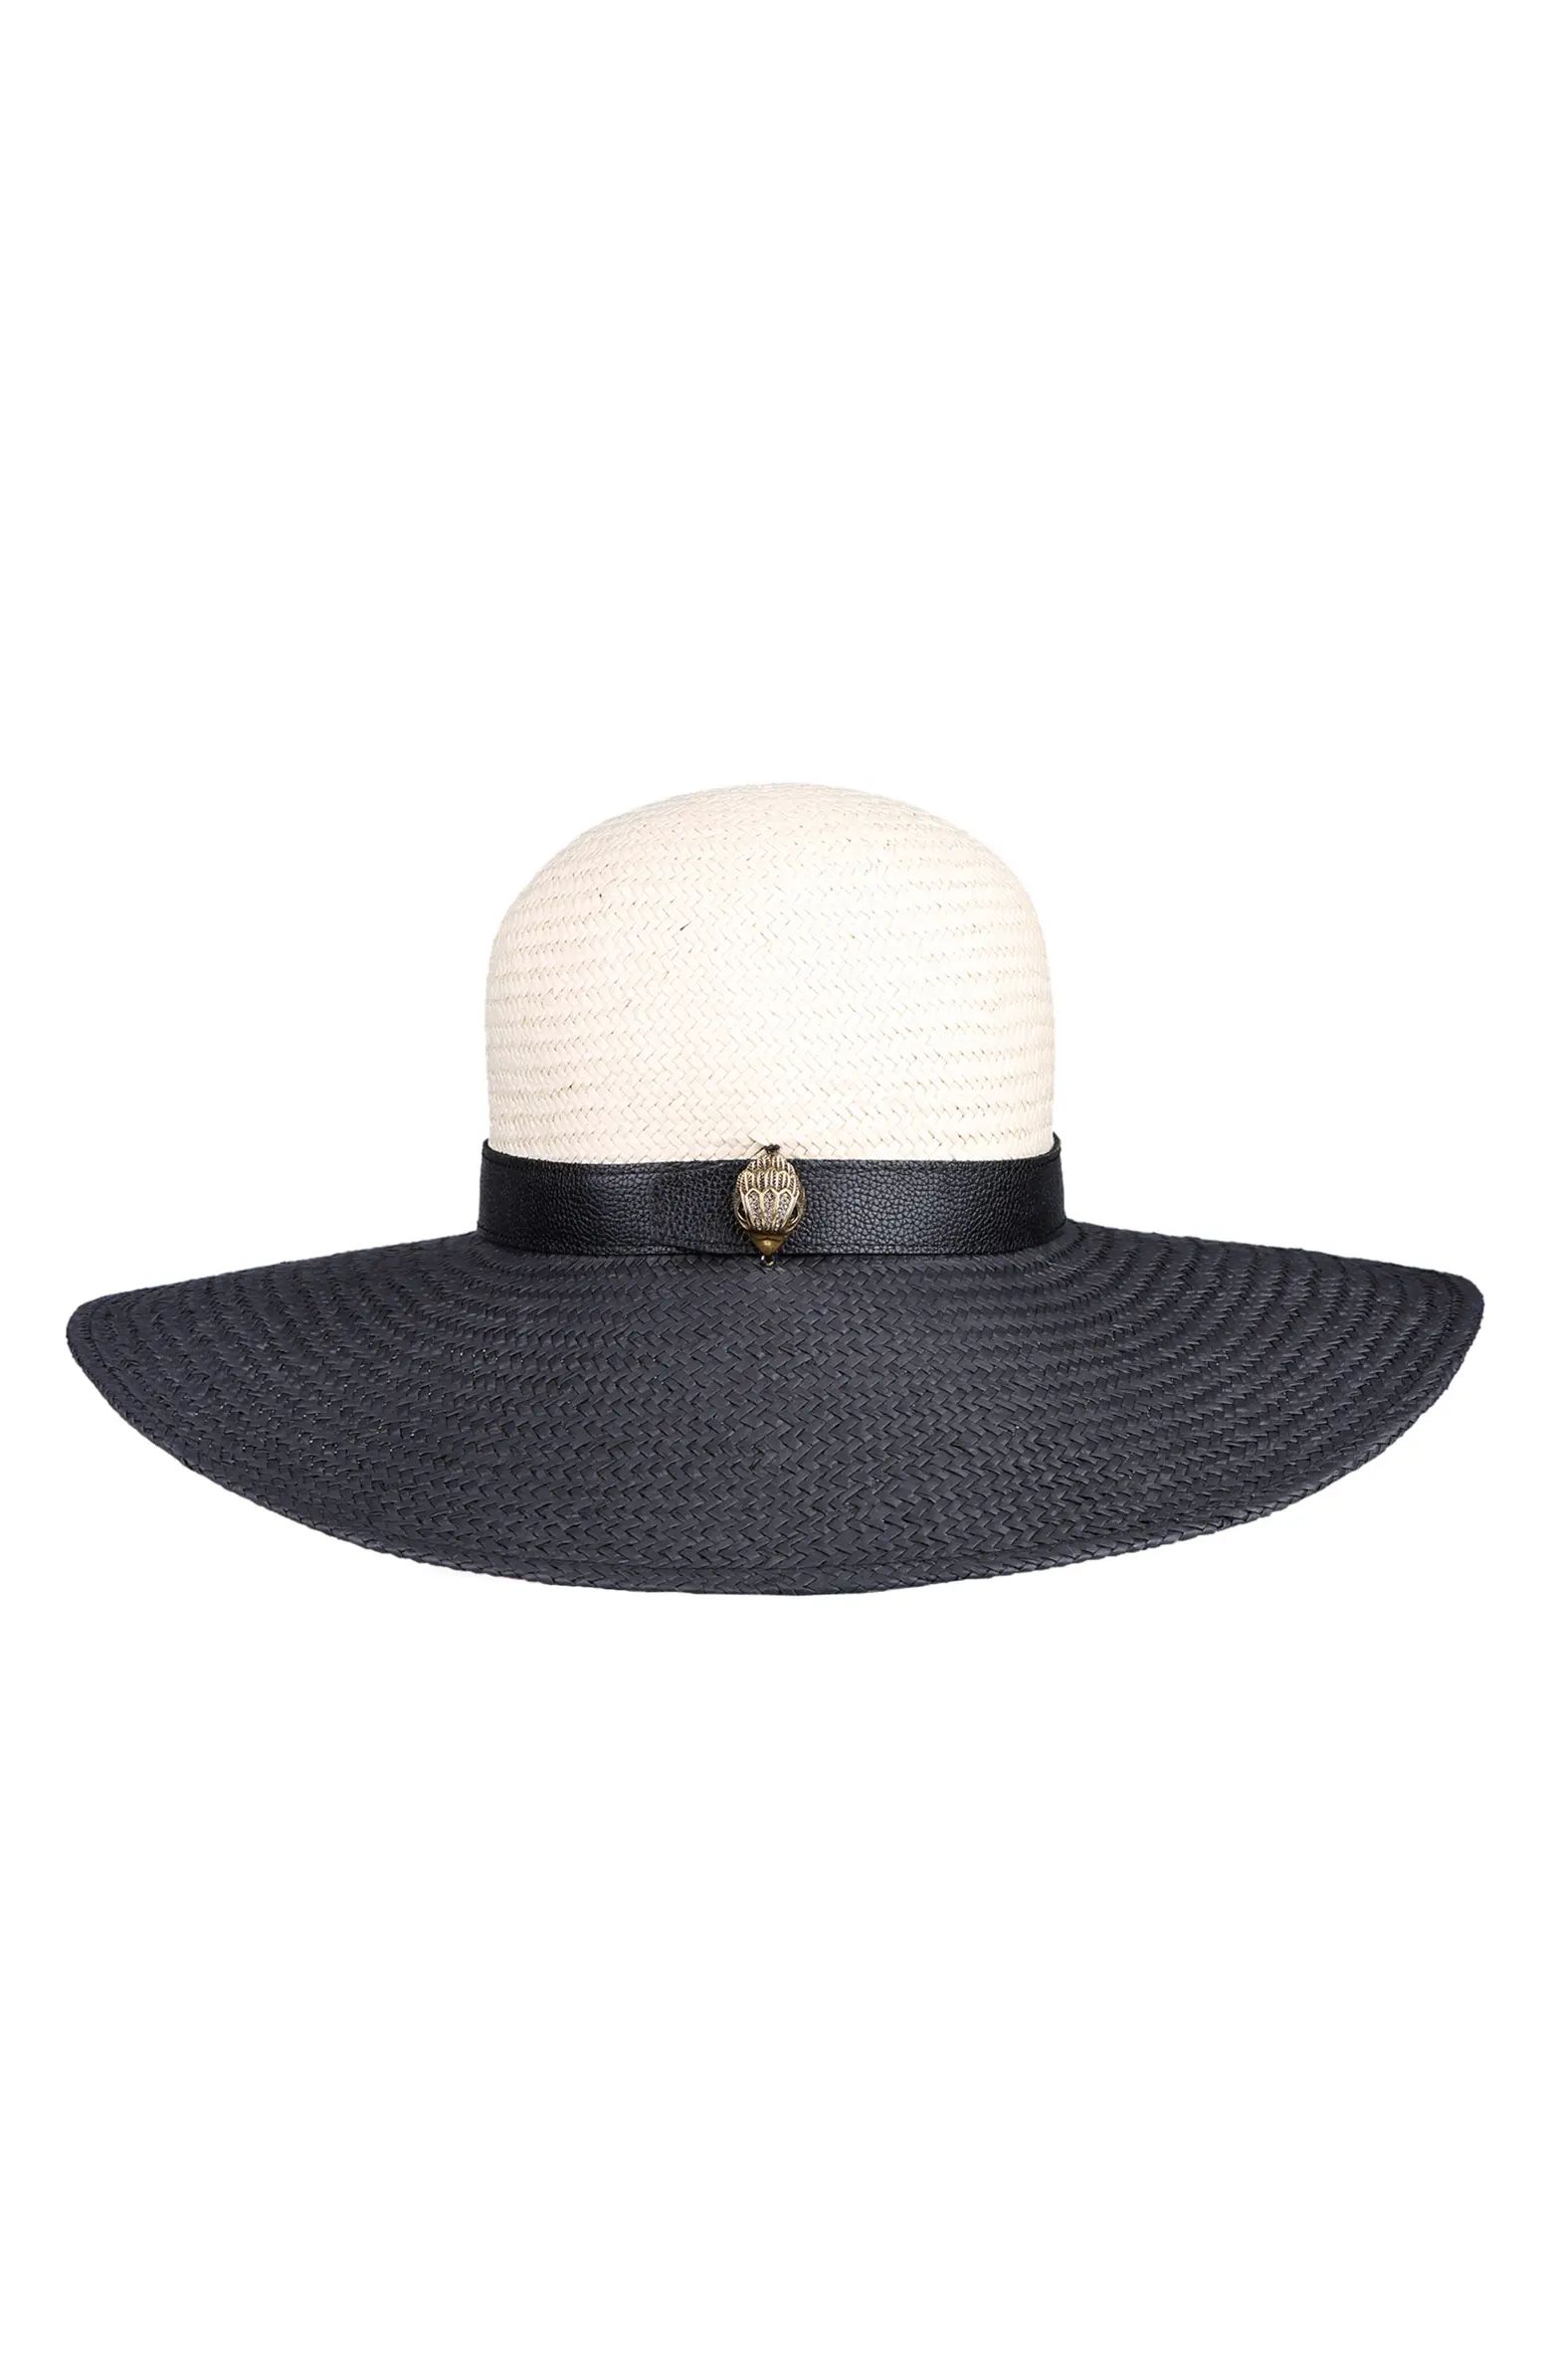 Two-Tone Straw Hat | Nordstrom